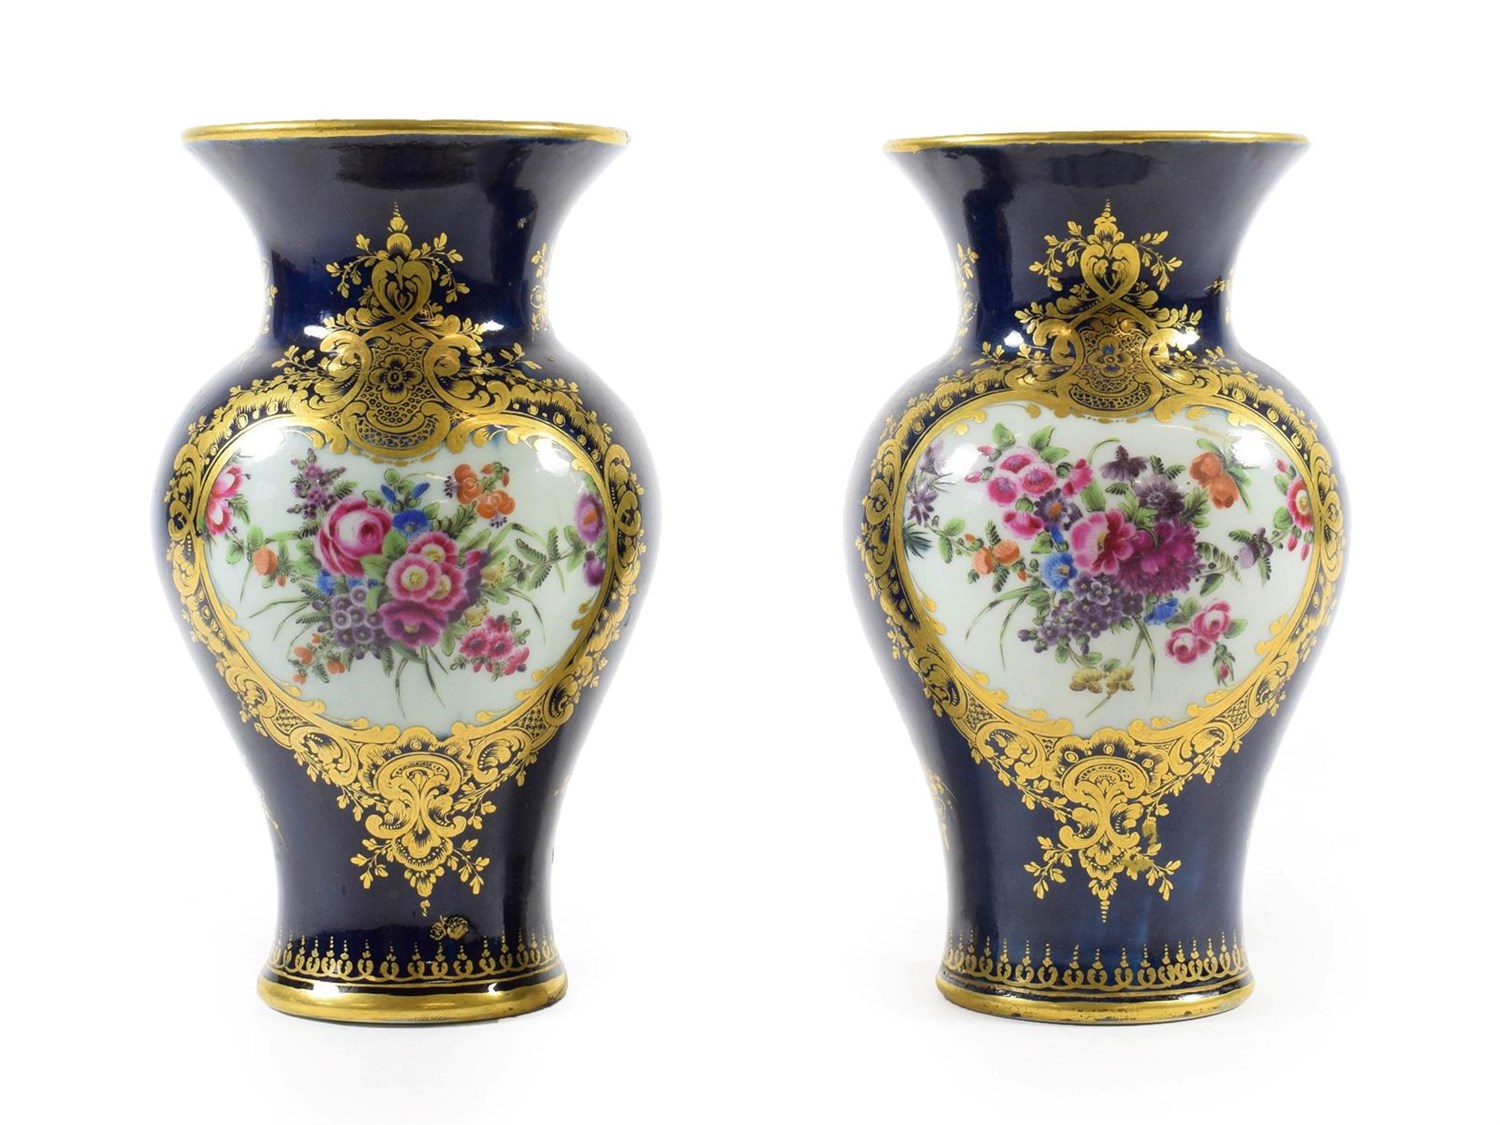 Lot 11 - A Pair of Worcester Porcelain Vases, circa 1770, of baluster form with trumpet necks, painted...